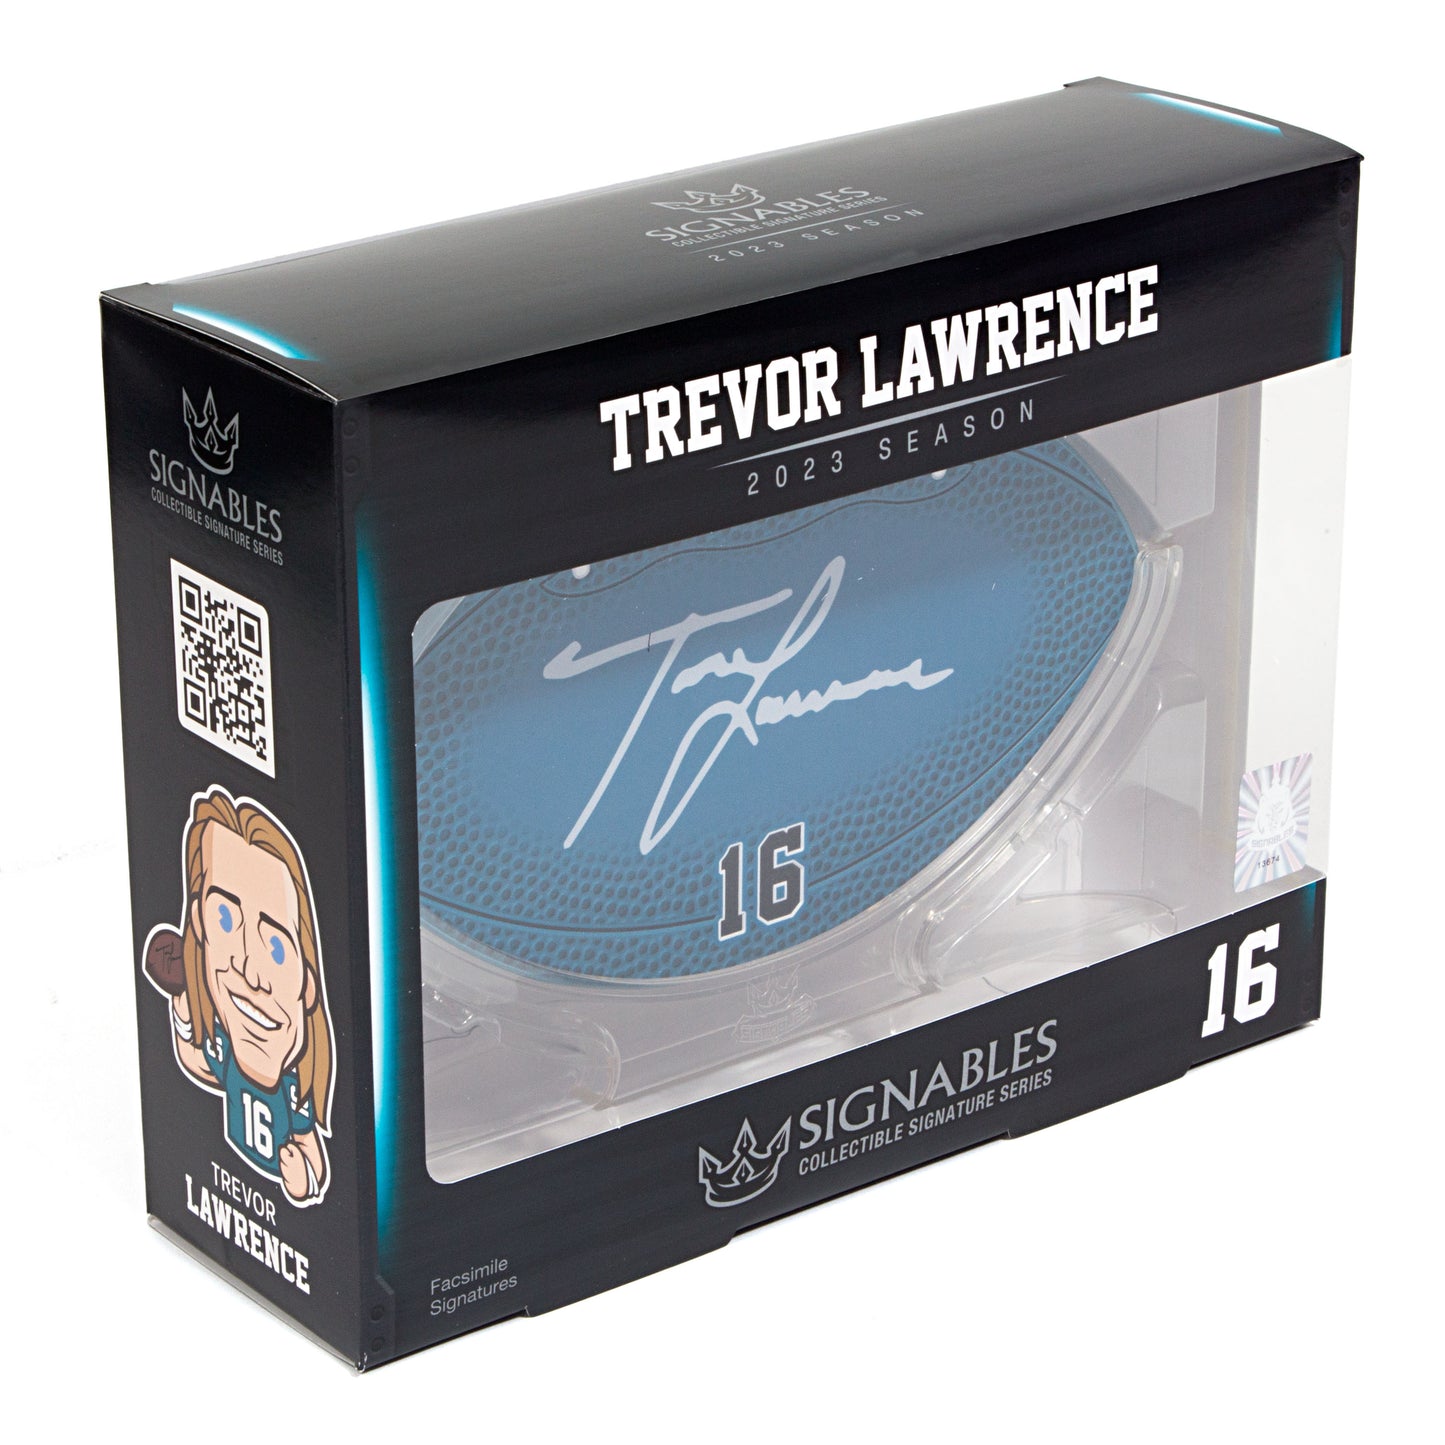 Trevor Lawrence  - NFLPA 2023 Signables Collectible